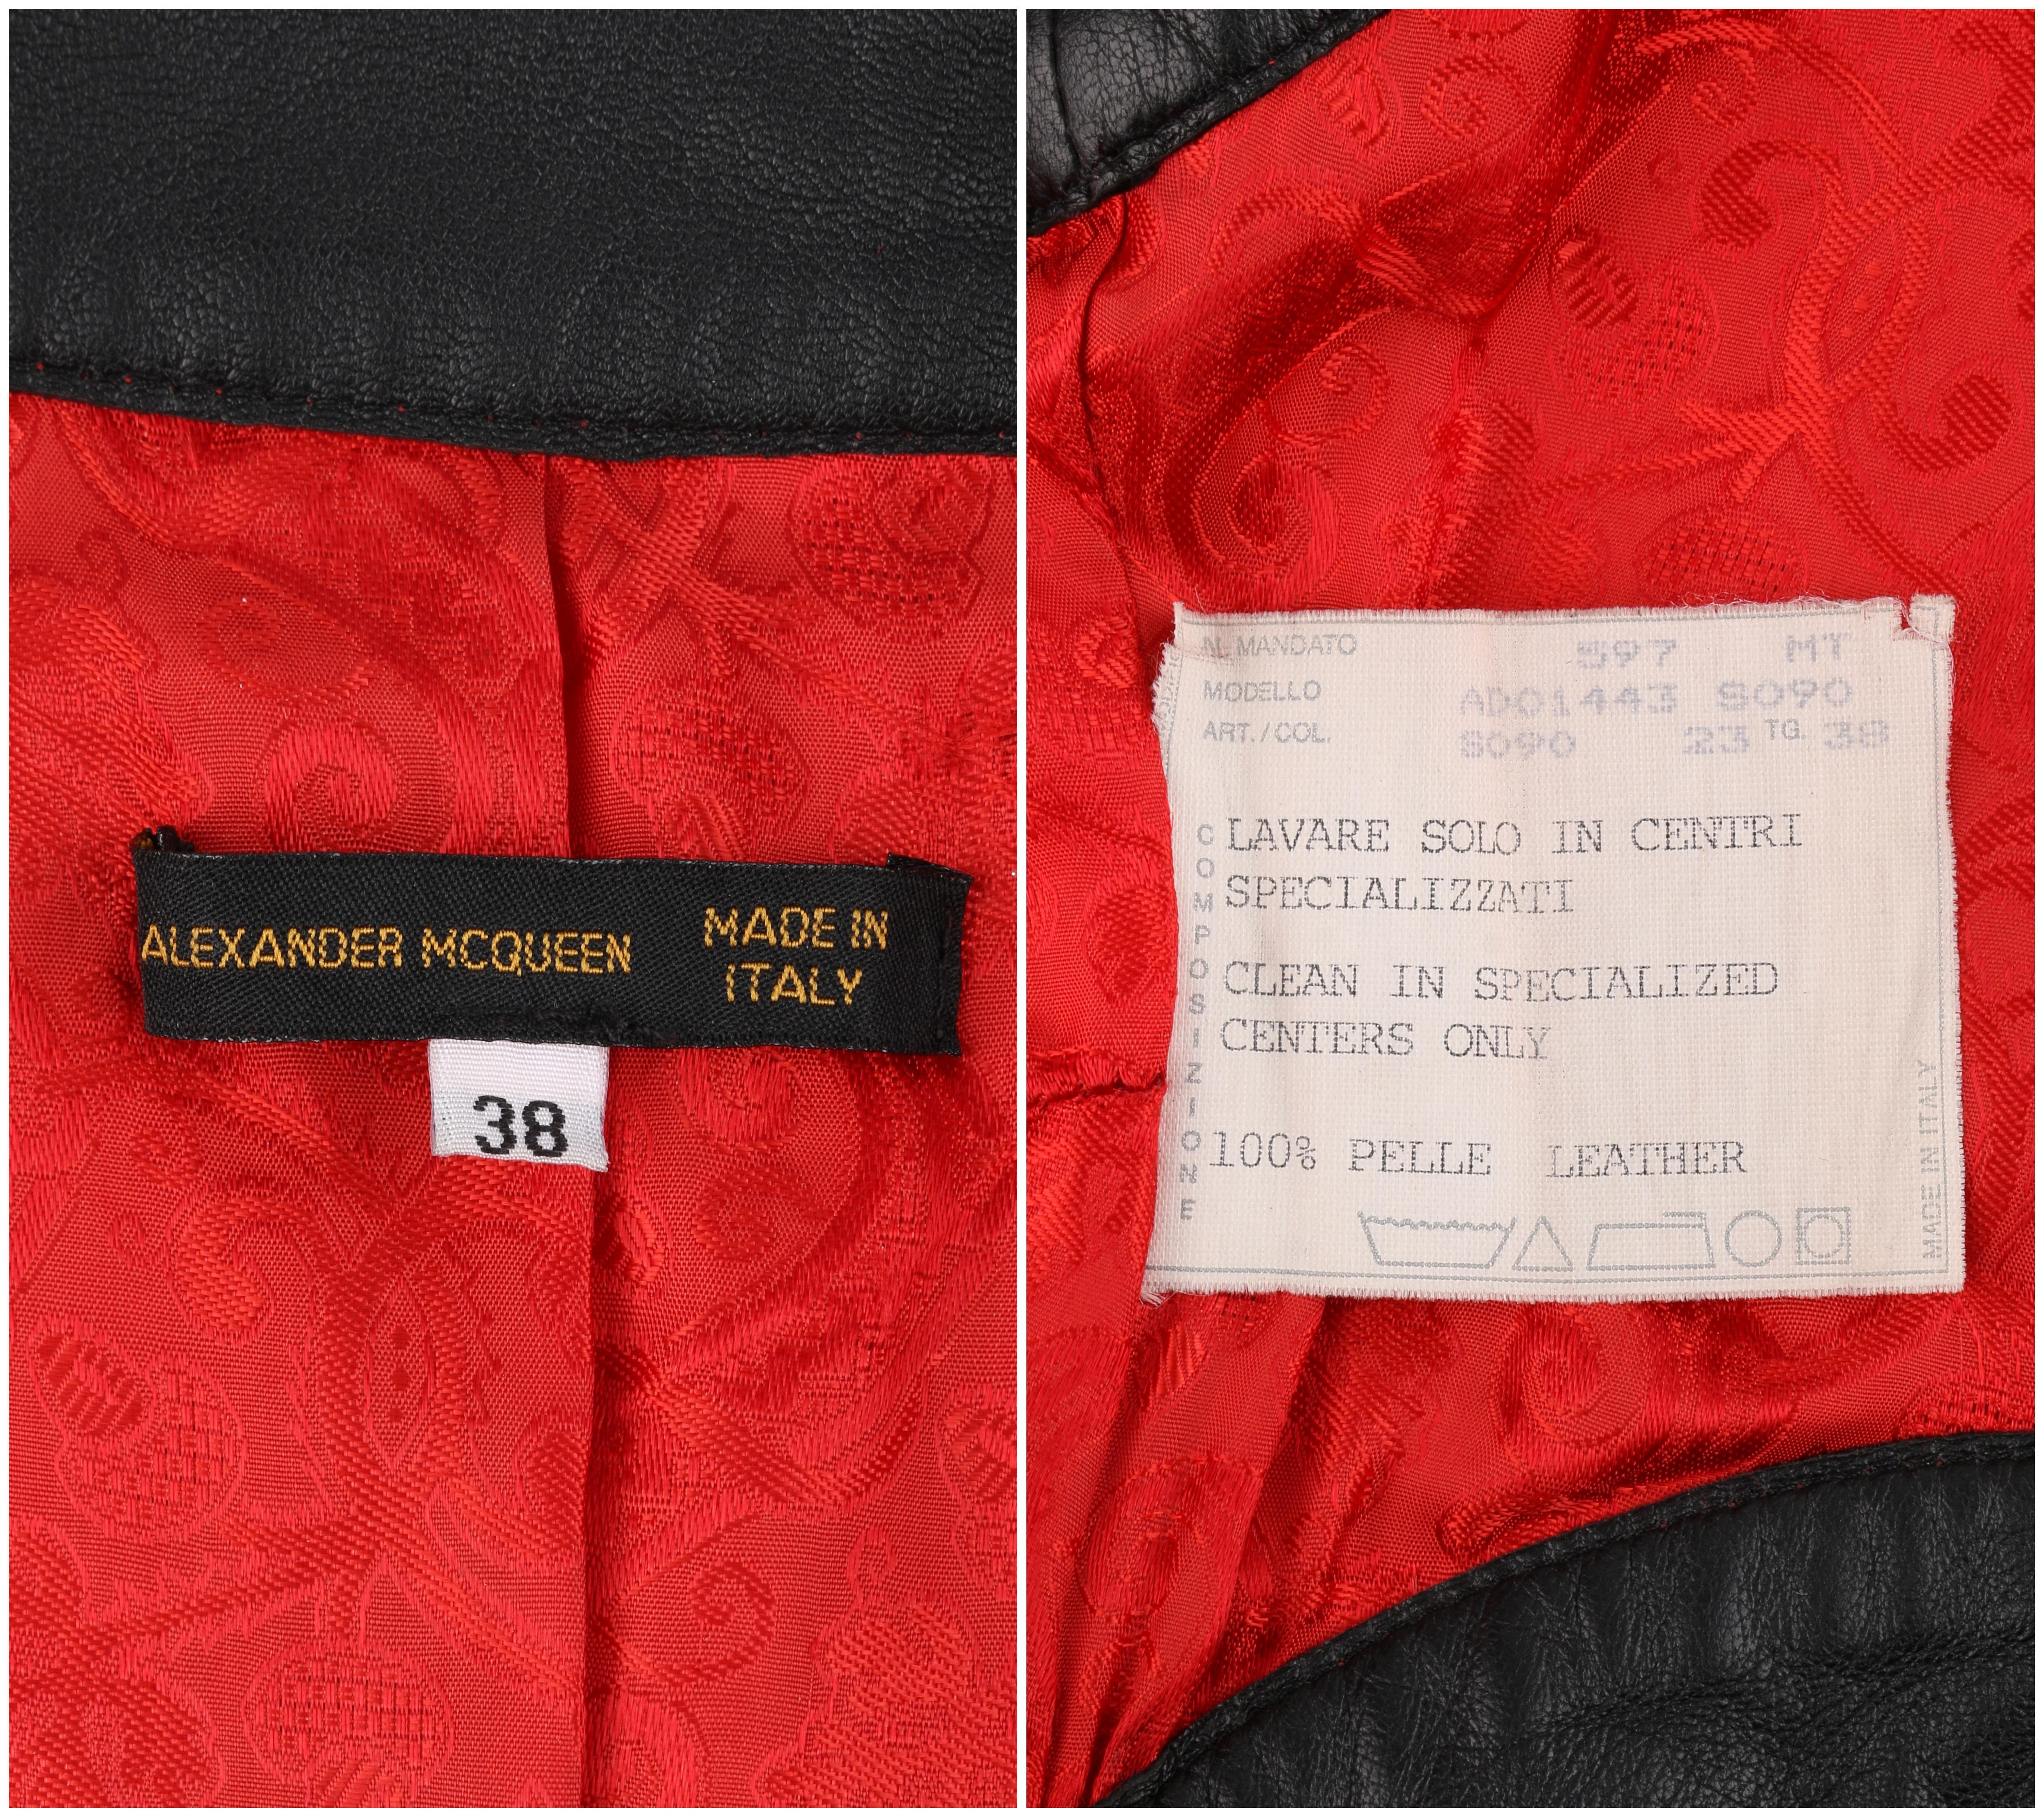 Women's ALEXANDER McQUEEN S/S 2000 “Eye” Runway Red Black Leather Cut Out Vest Jacket For Sale